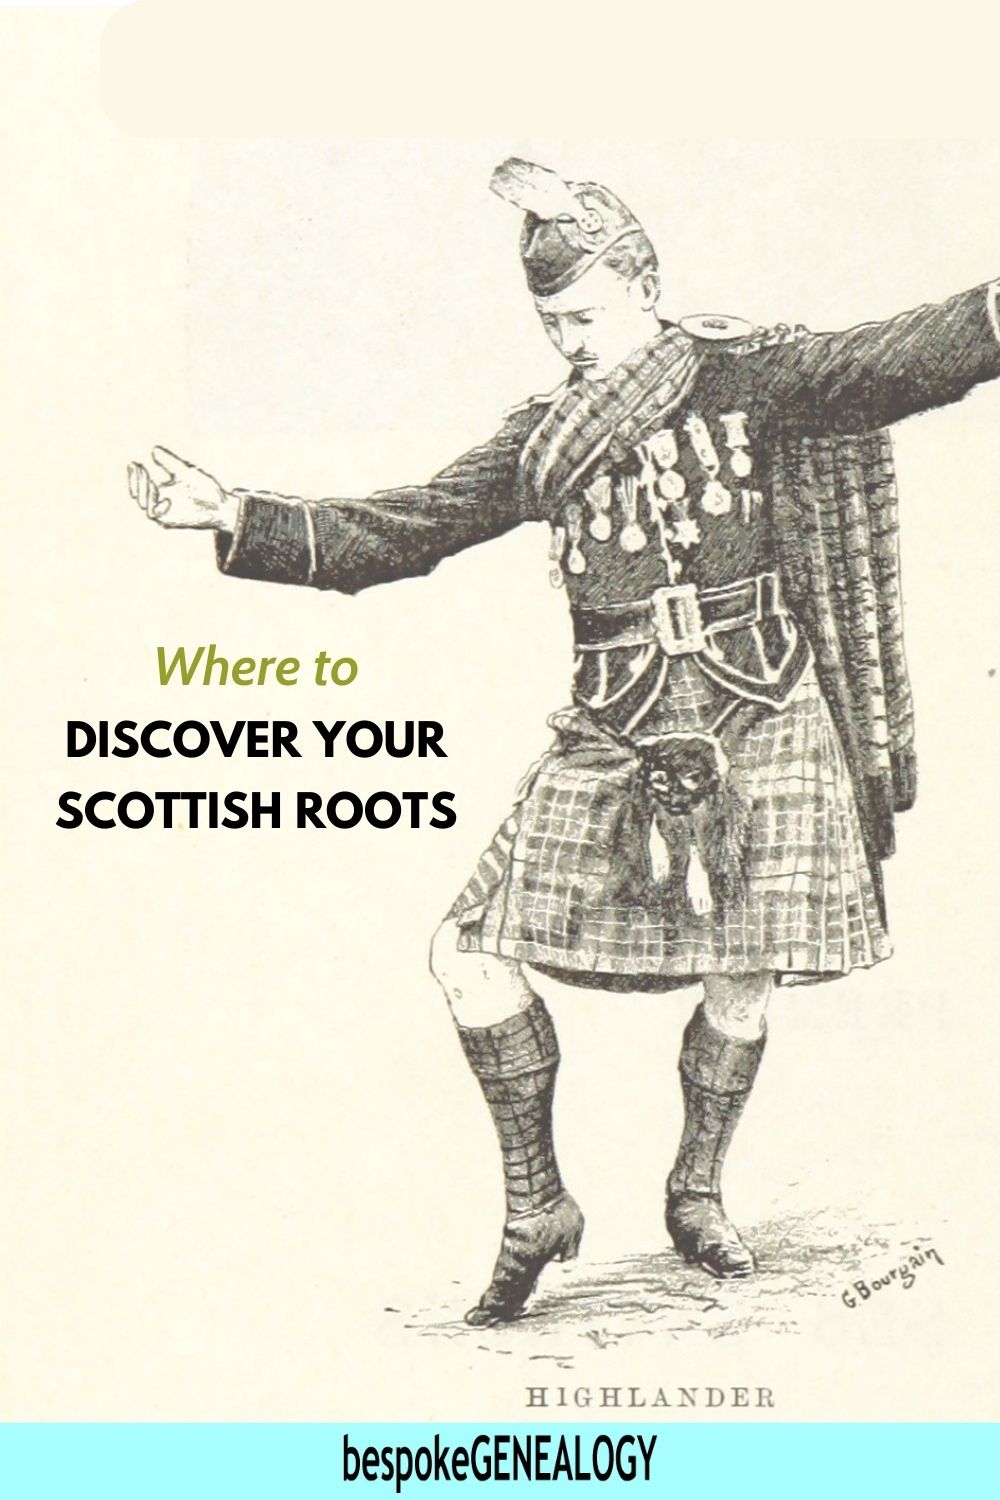 Where to discover your Scottish roots. Drawing of a Scottish Highlander wearing a kilt and dancing.